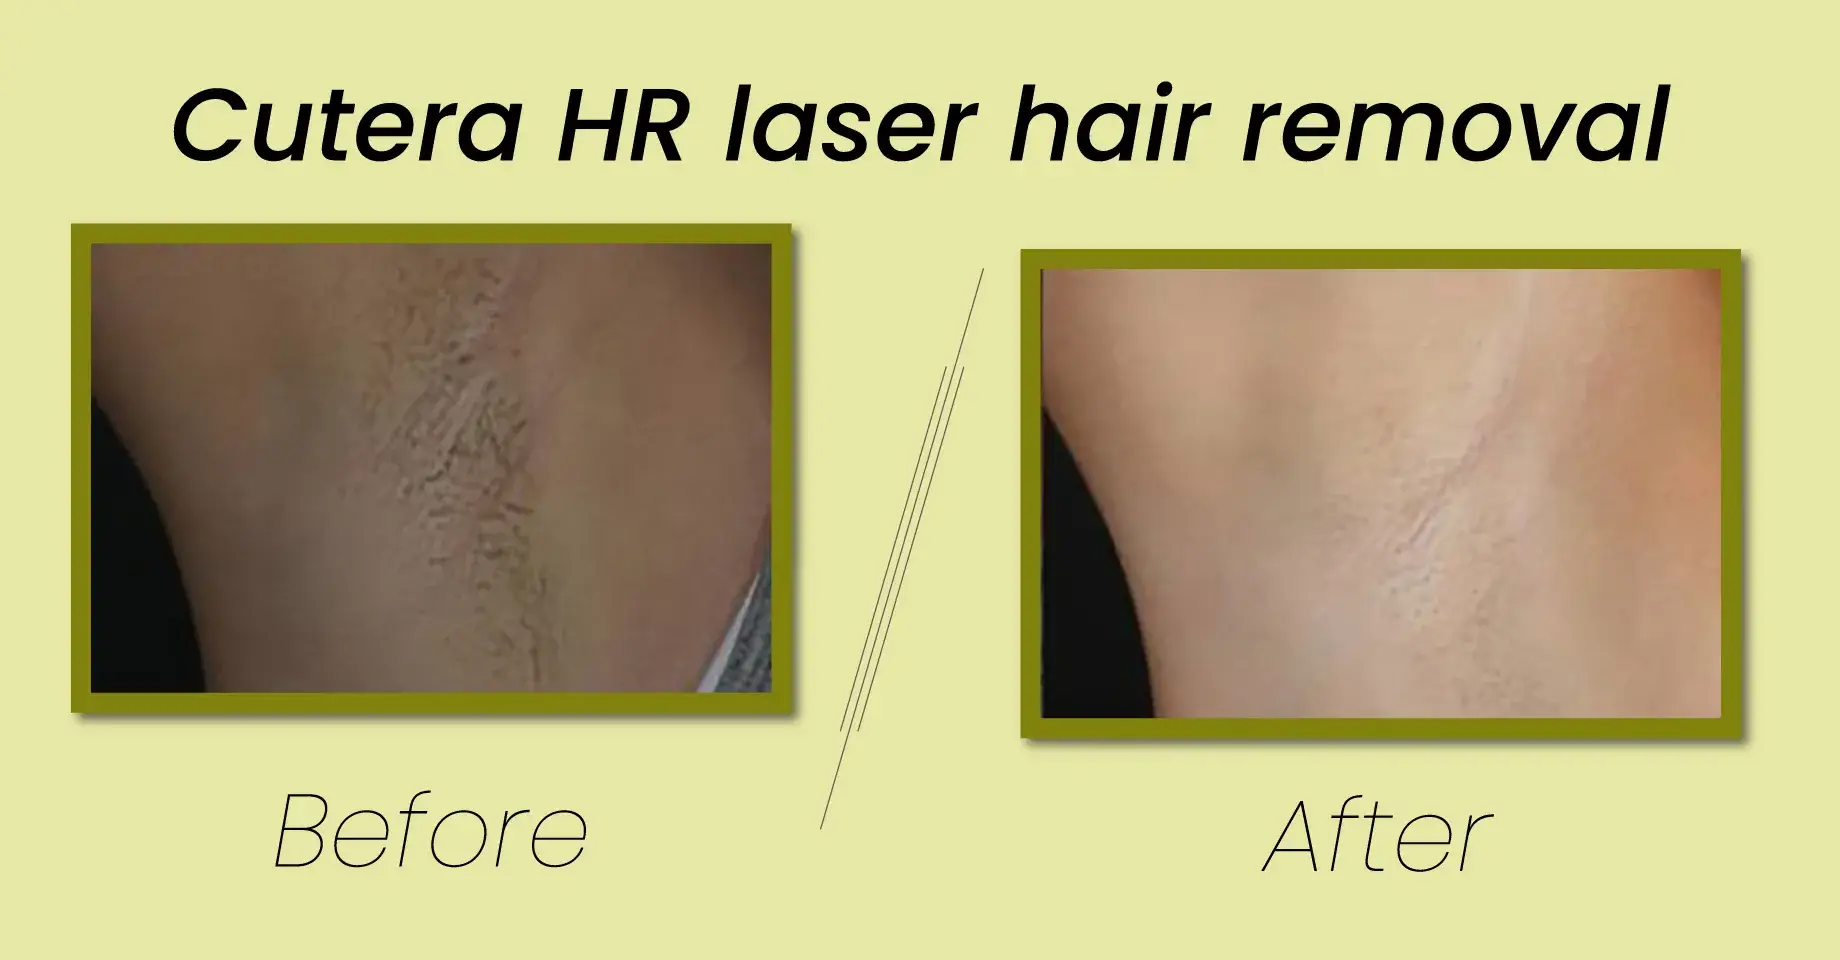 Photo Courtesy for Laser hair removal treatment with us